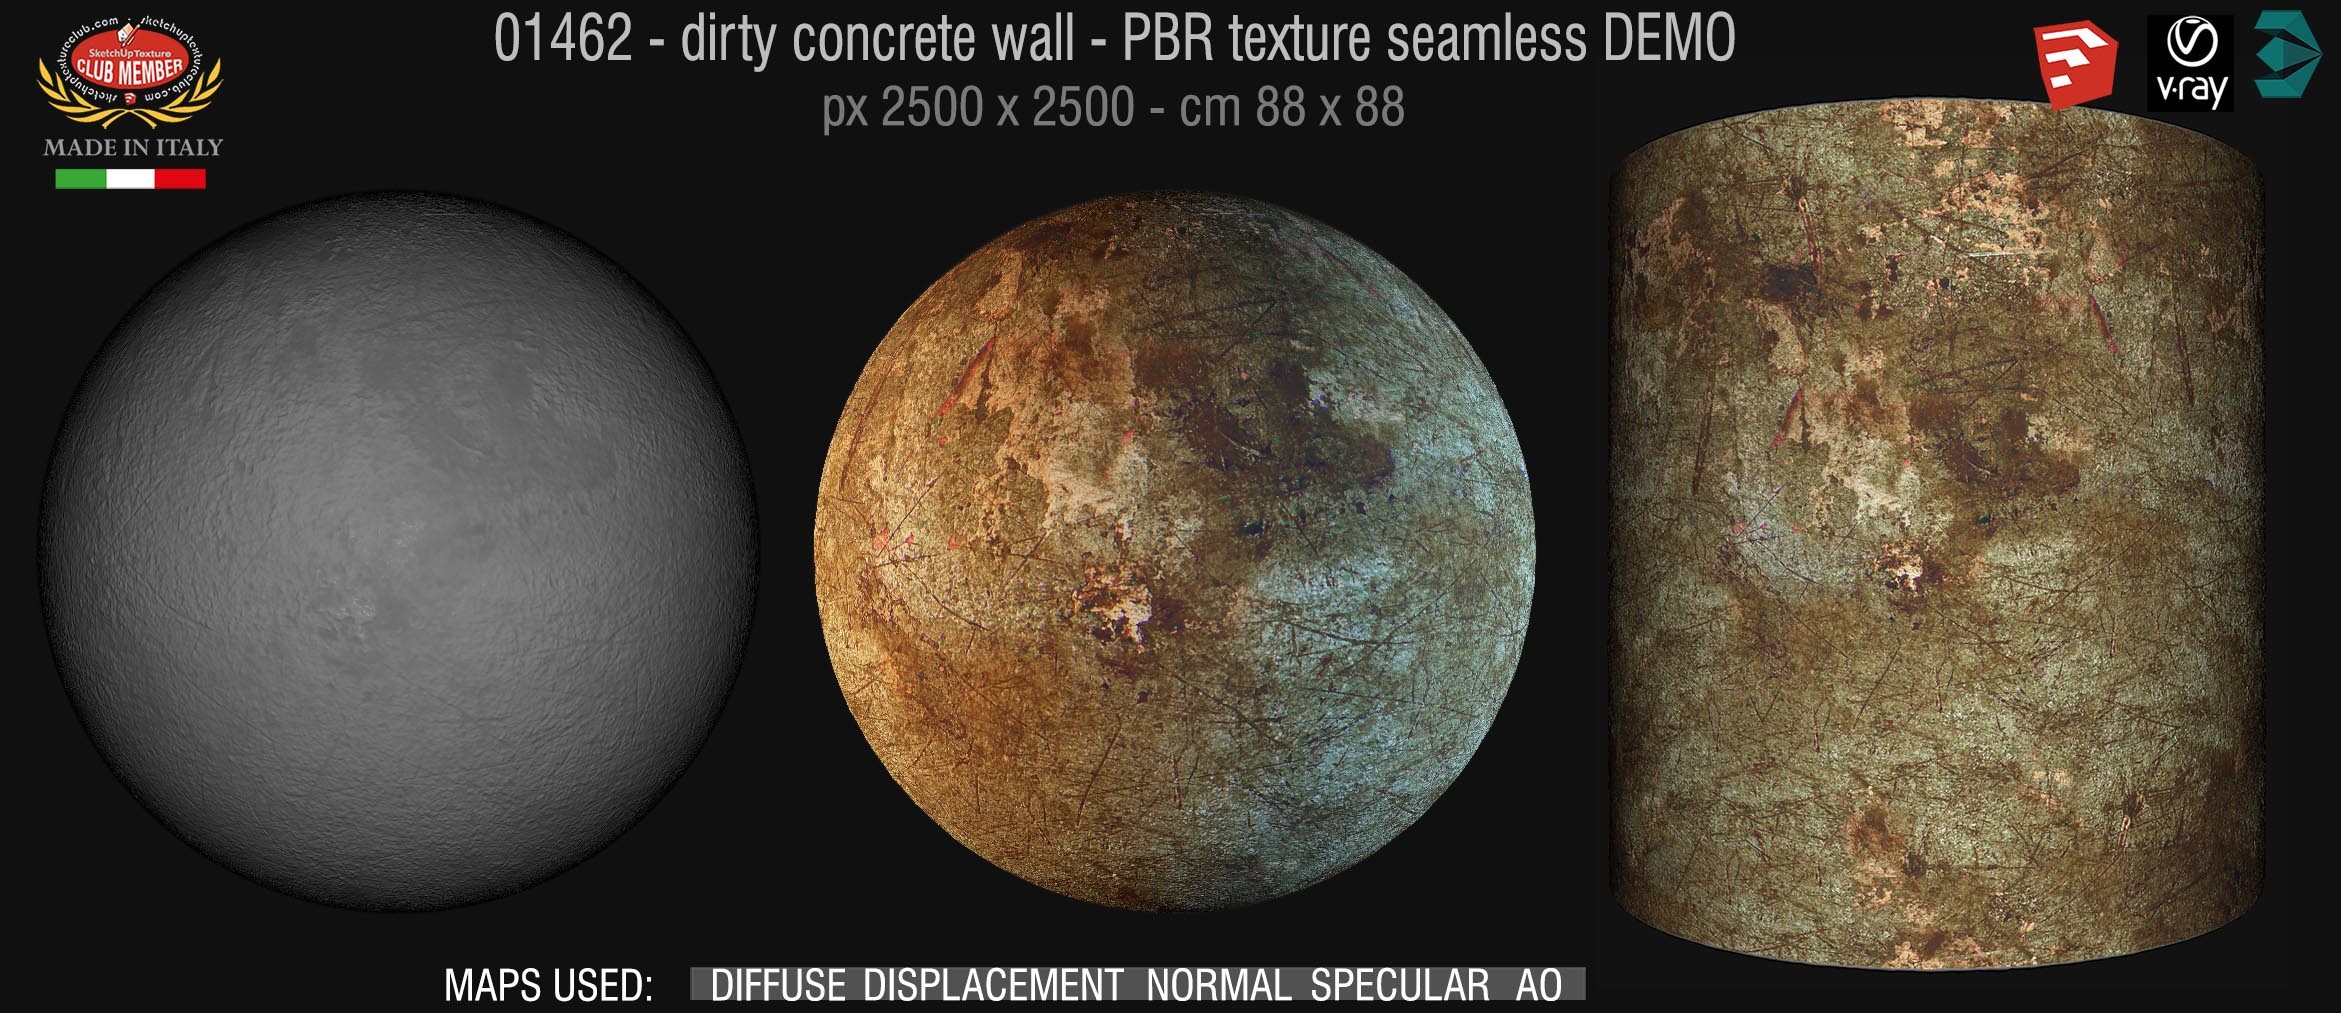 01462 Concrete bare dirty wall PBR texture seamless DEMO